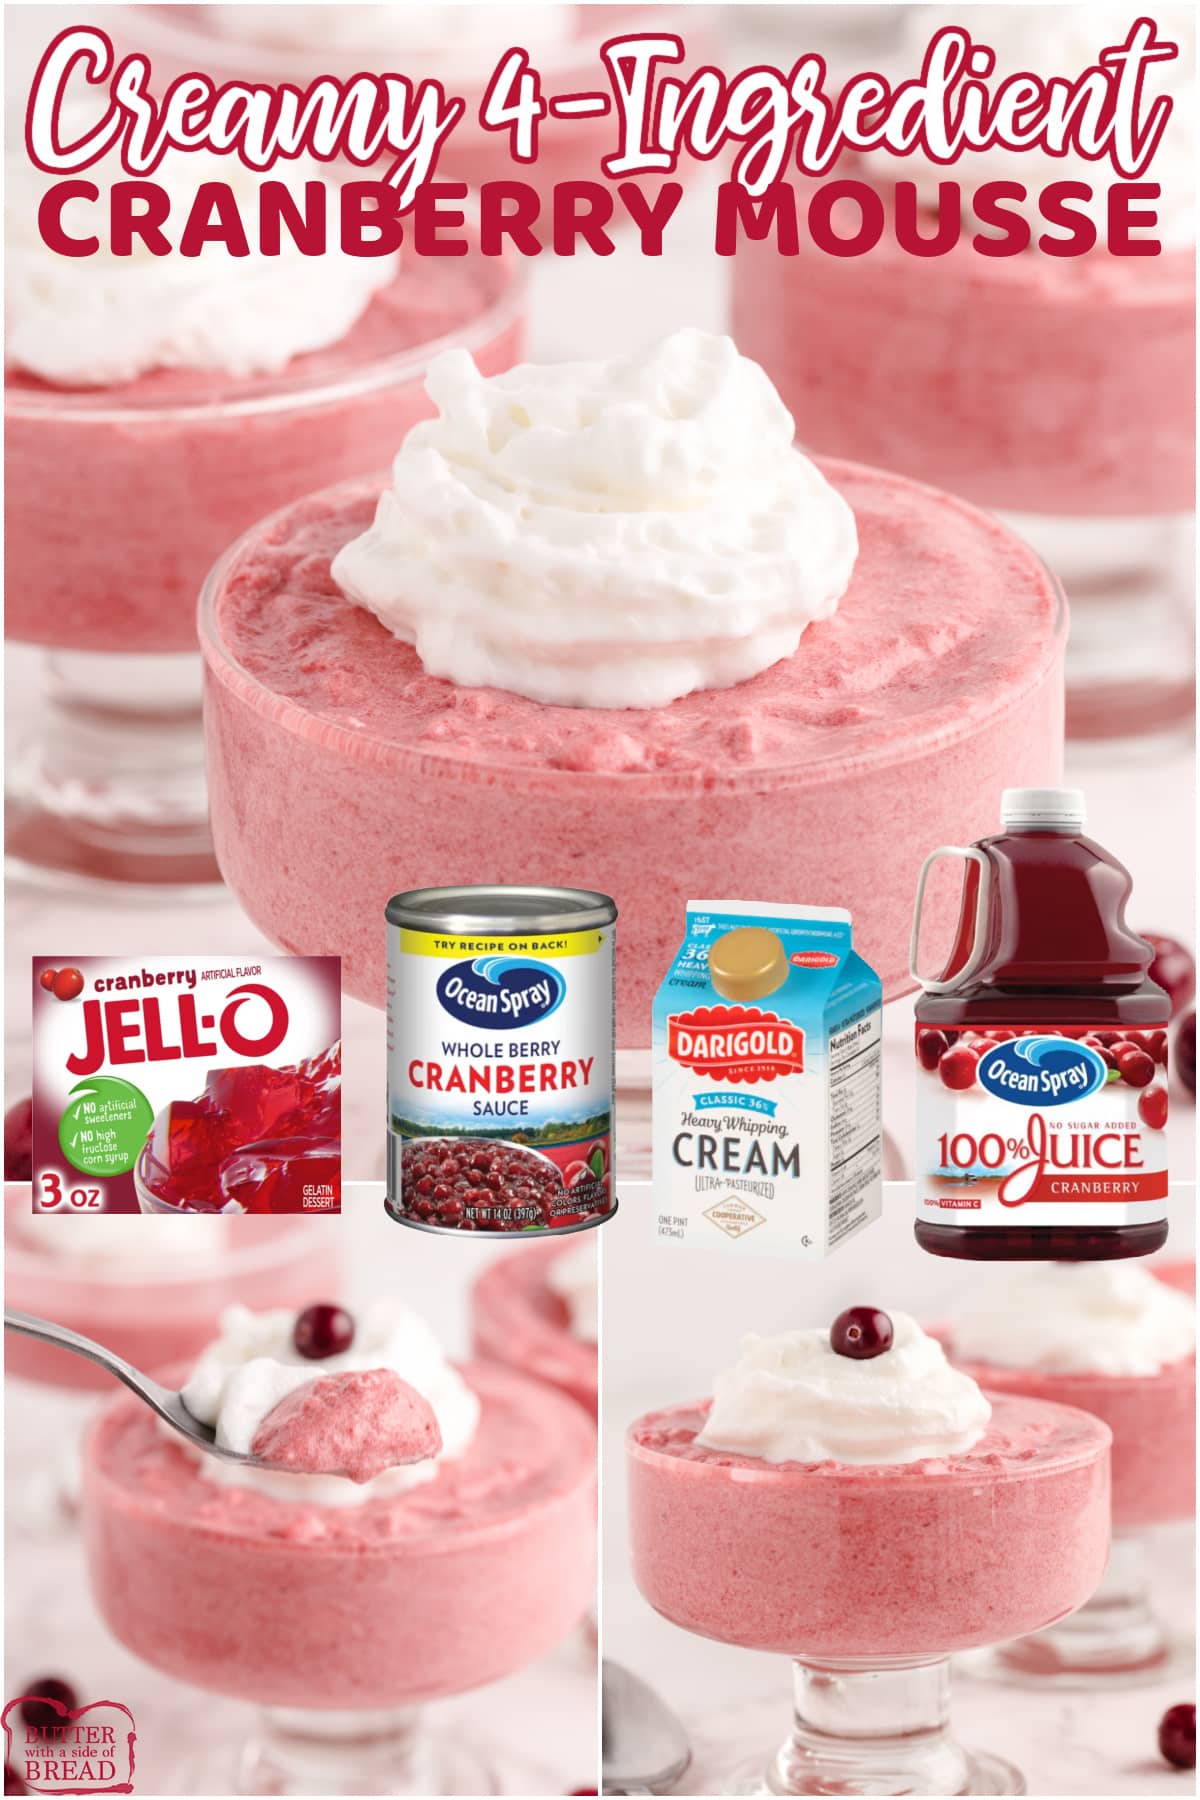 Creamy Cranberry Mousse made with canned cranberry sauce, cranberry juice, Jello and whipped cream. Delicious cranberry dessert that is simple to make and delicious to eat!